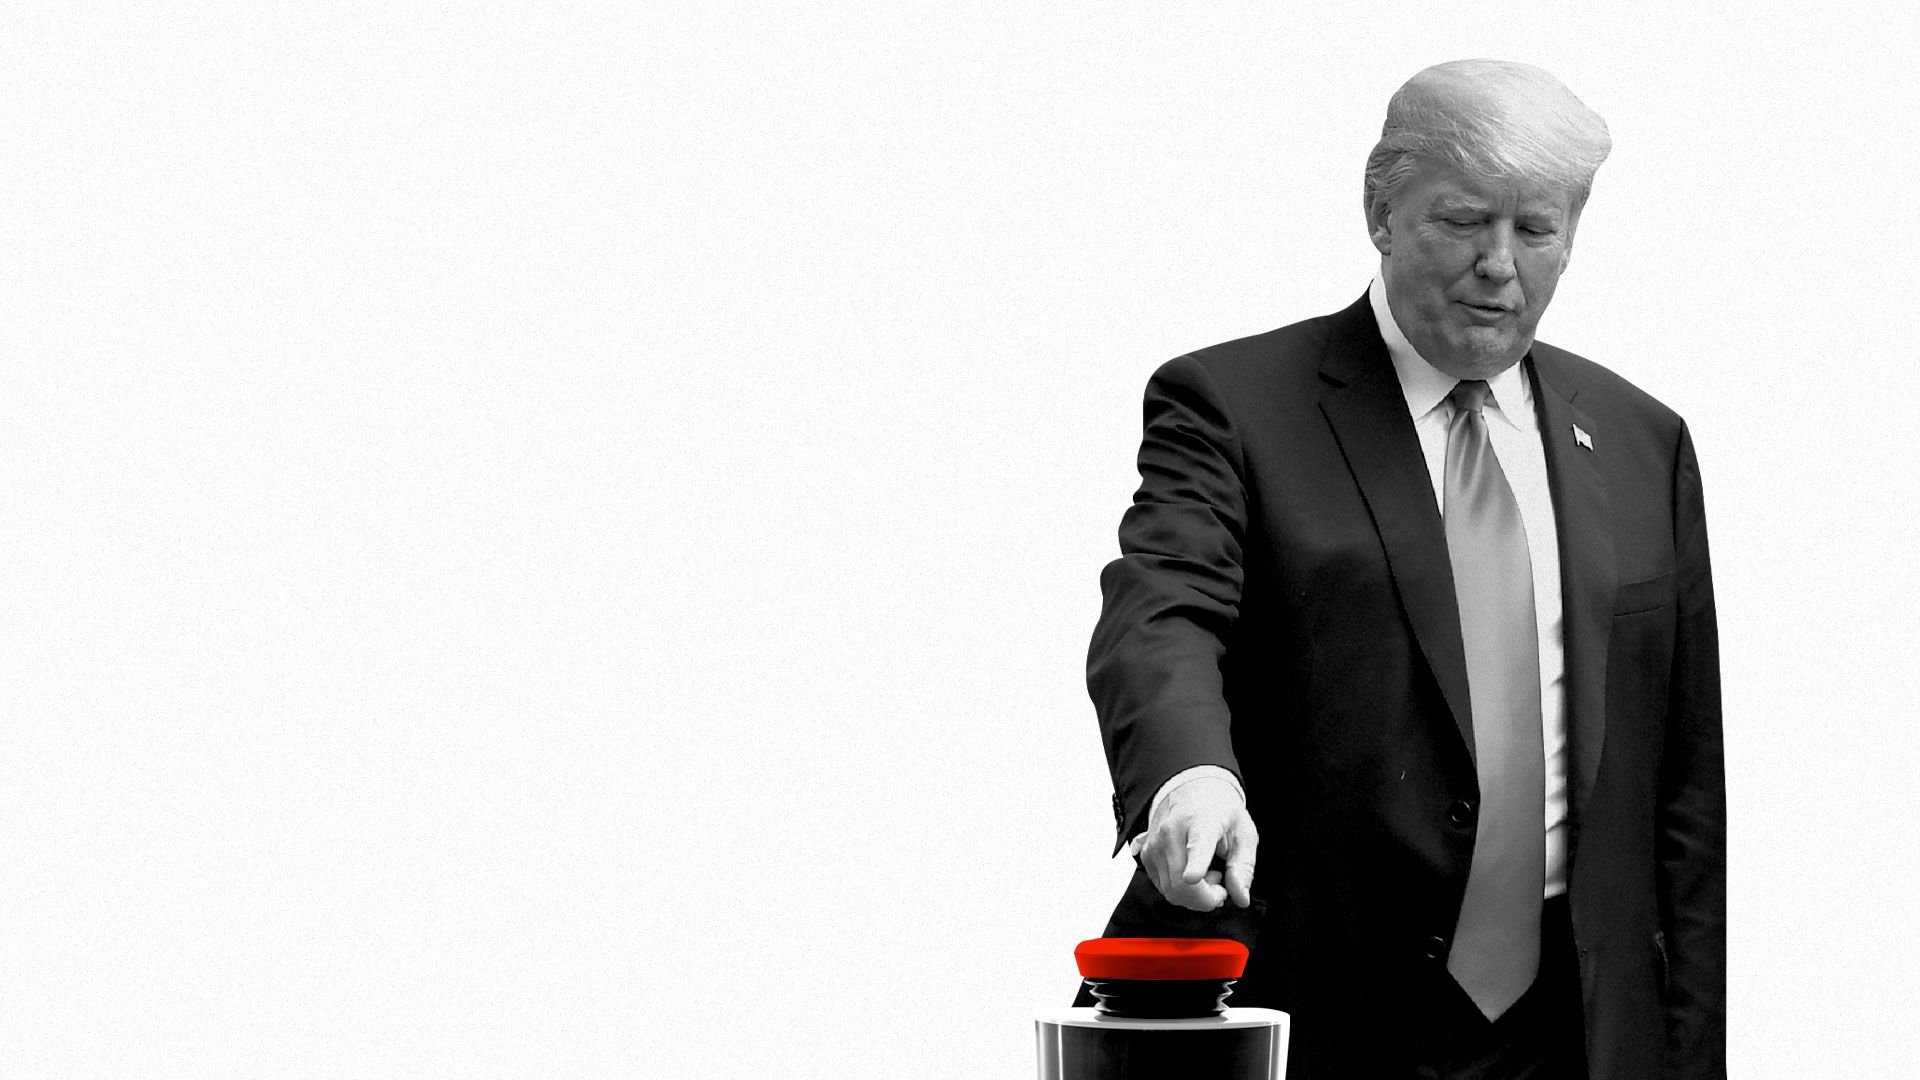 Illustration of Trump about to push the red button.